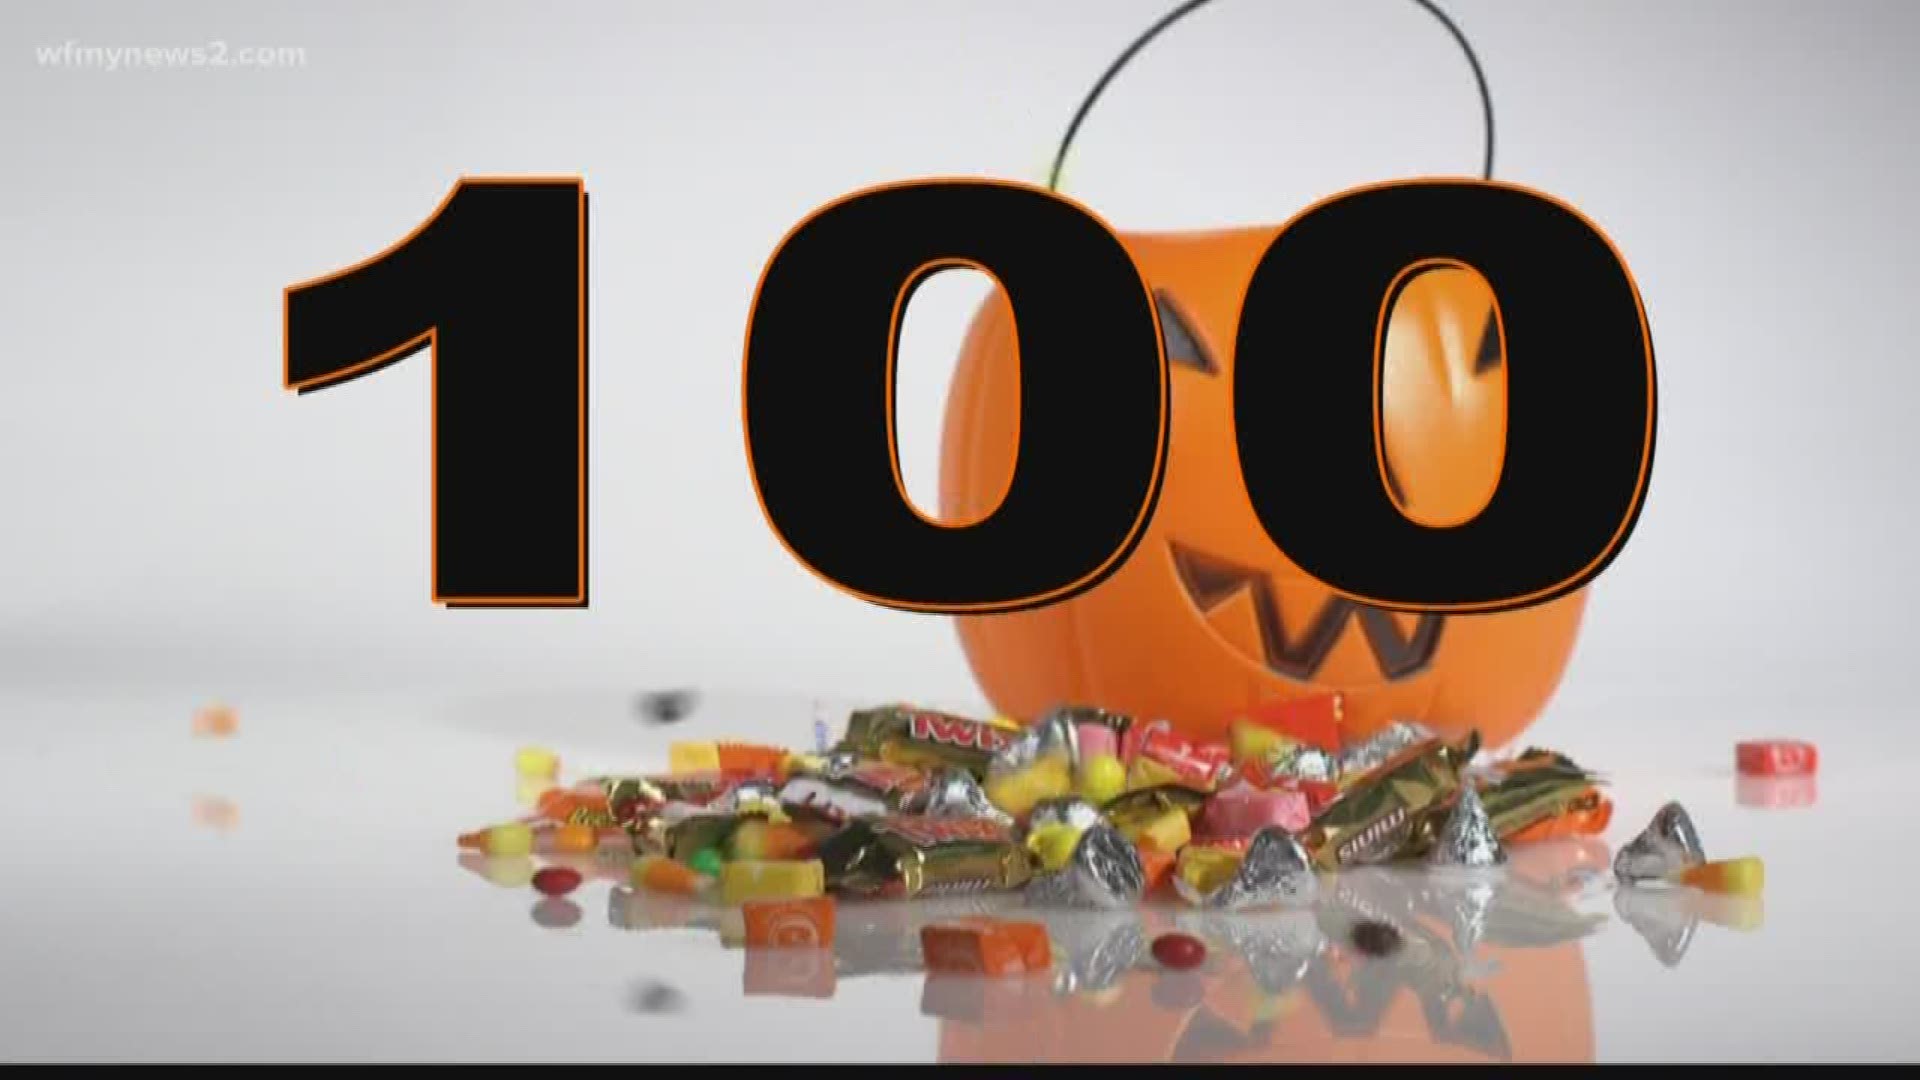 It’s the part of Halloween that we all love. But how many calories will it cost you?